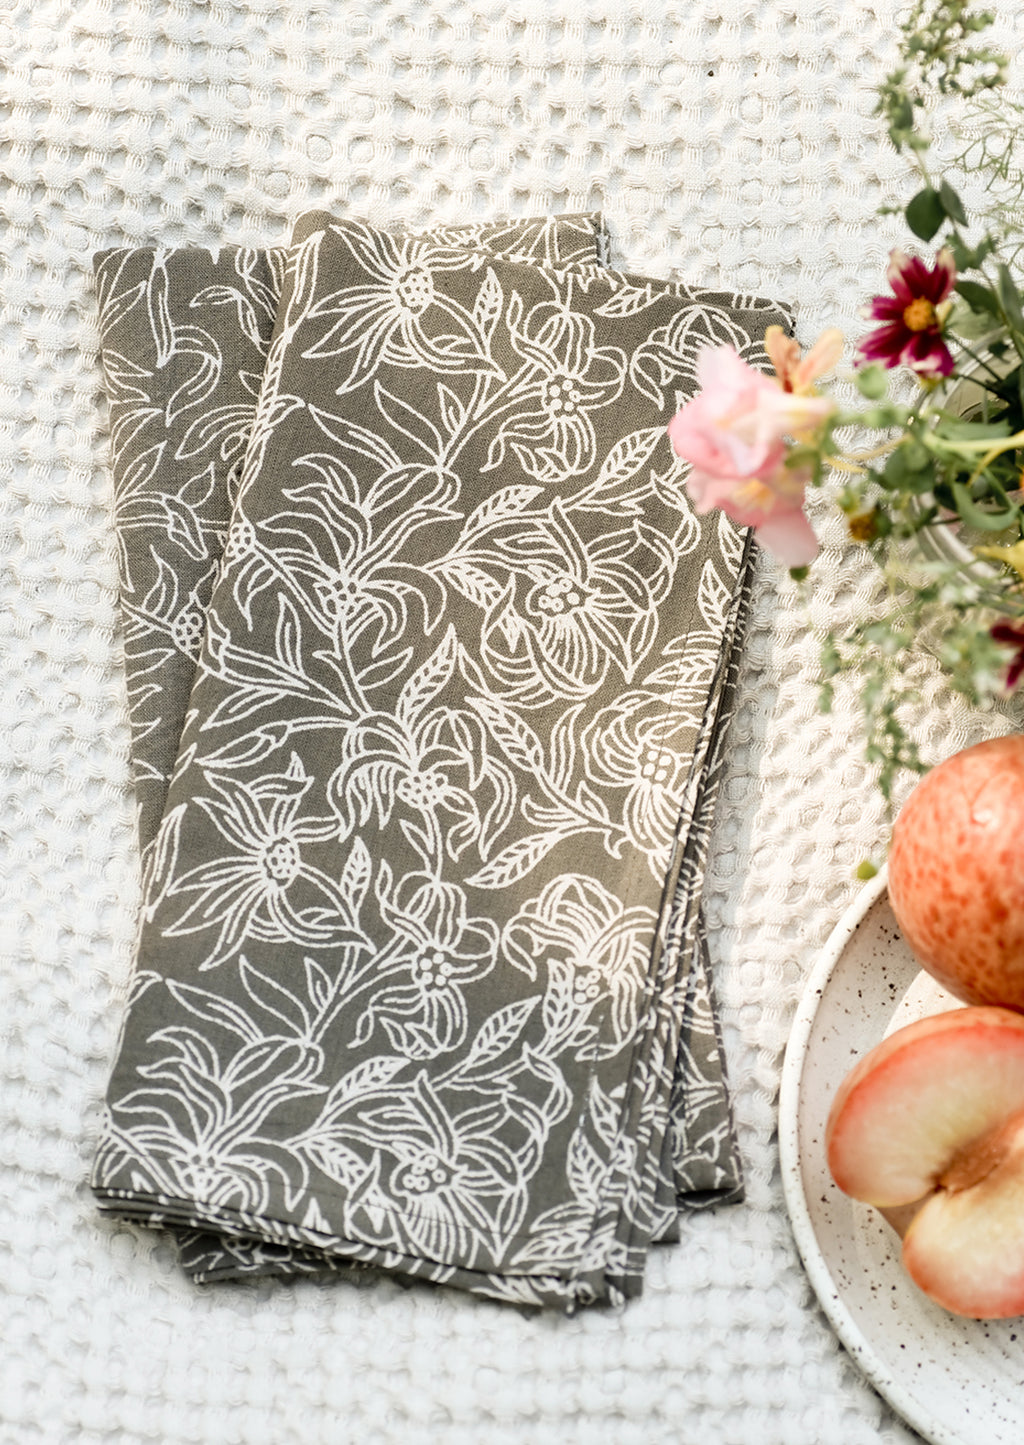 1: A pair of grey and white floral print napkins on blanket.